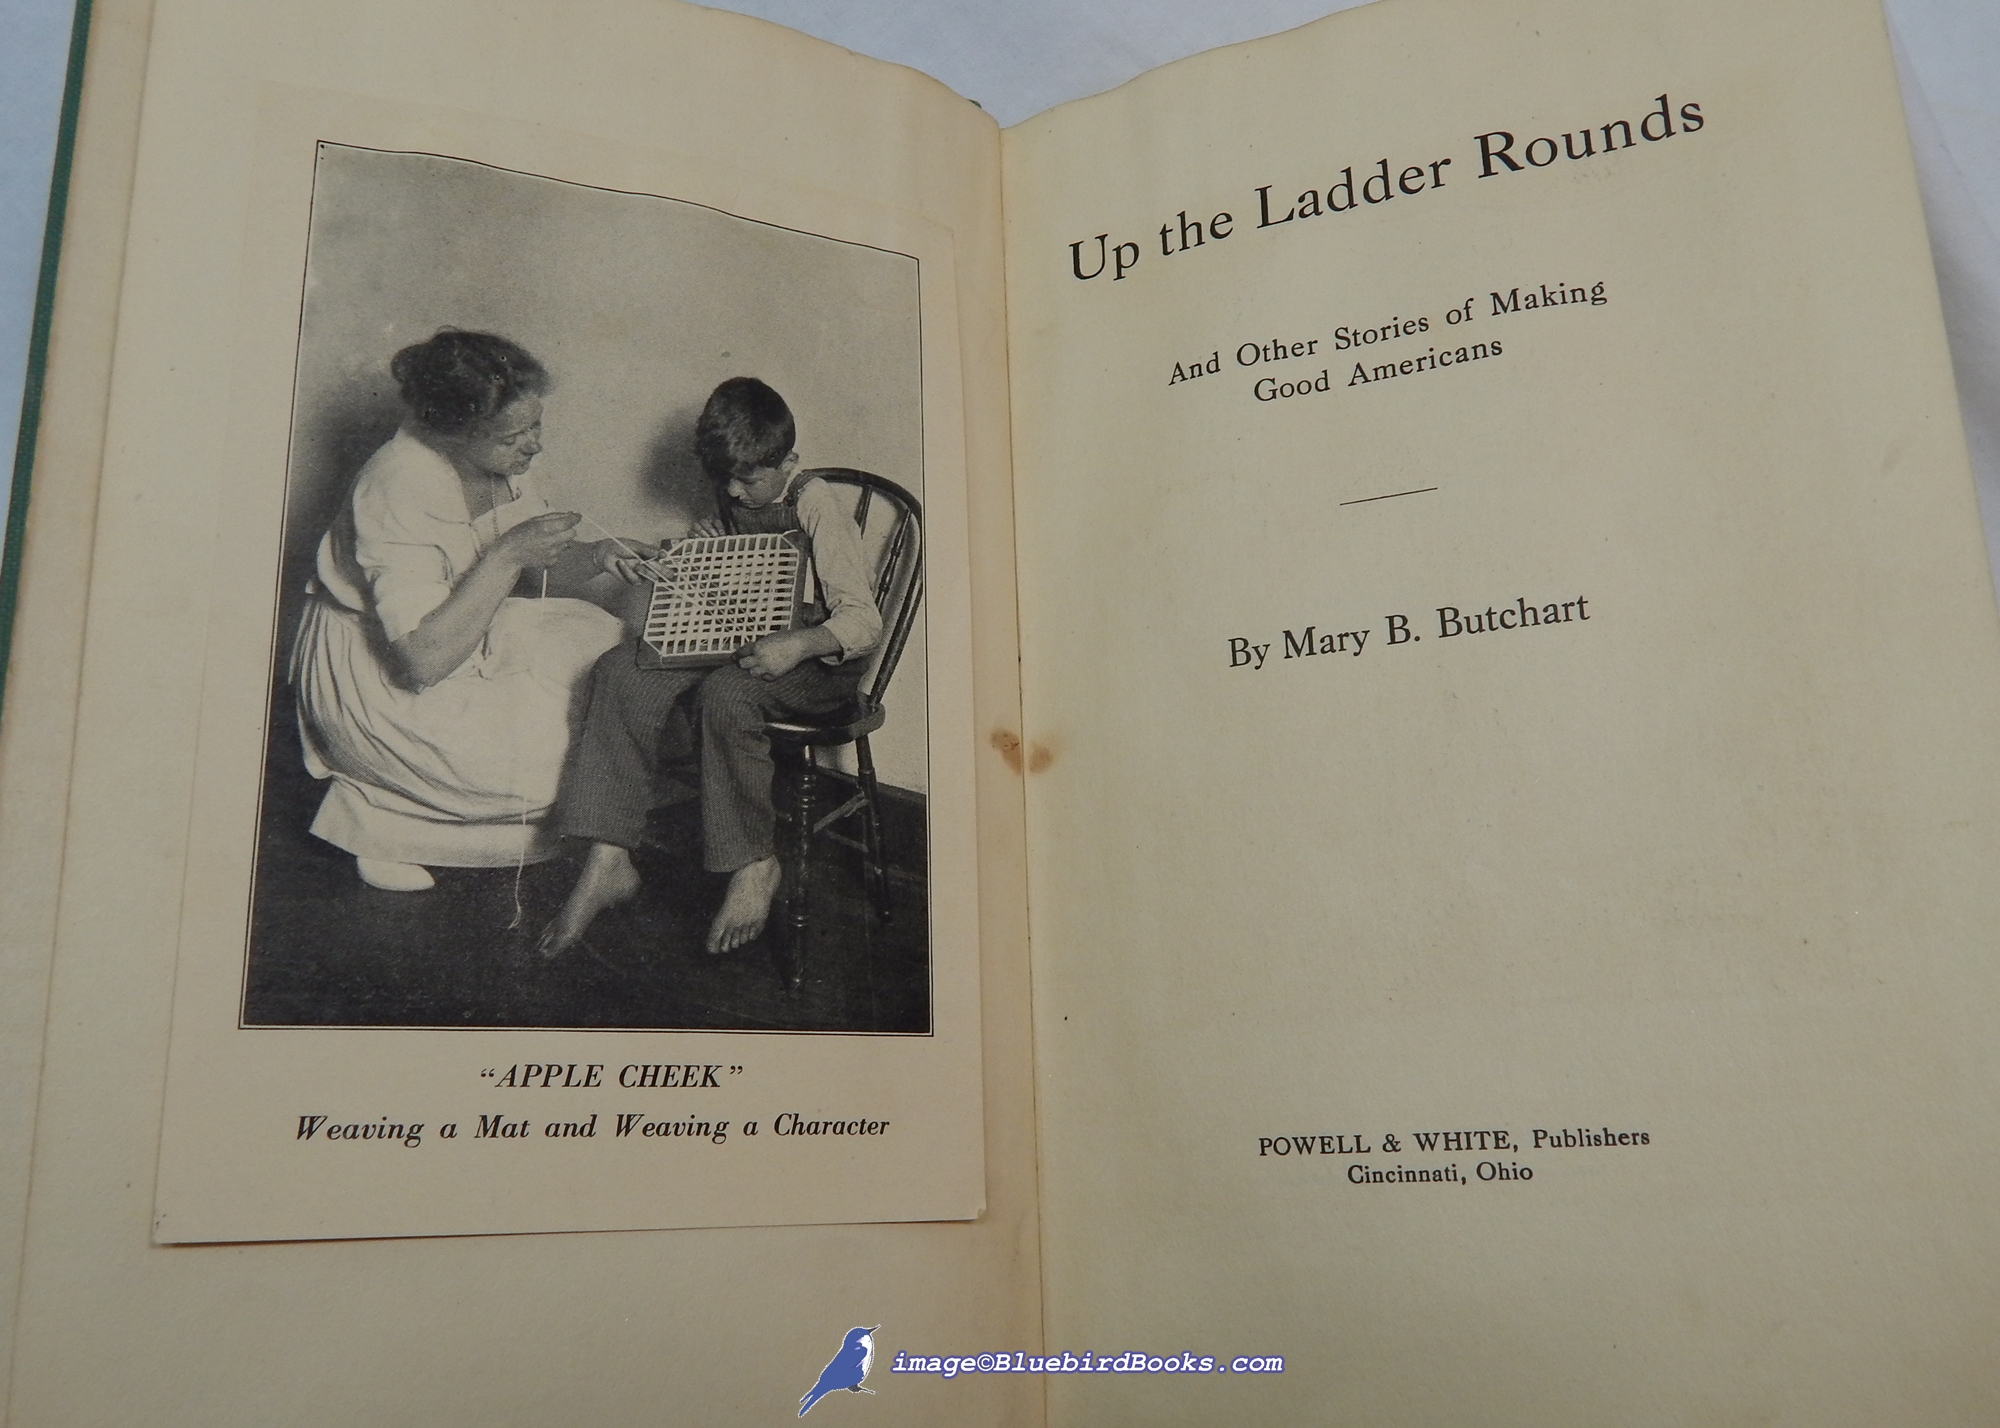 BUTCHART, MARY B. - Up the Ladder Rounds, and Other Stories of Making Good Americans